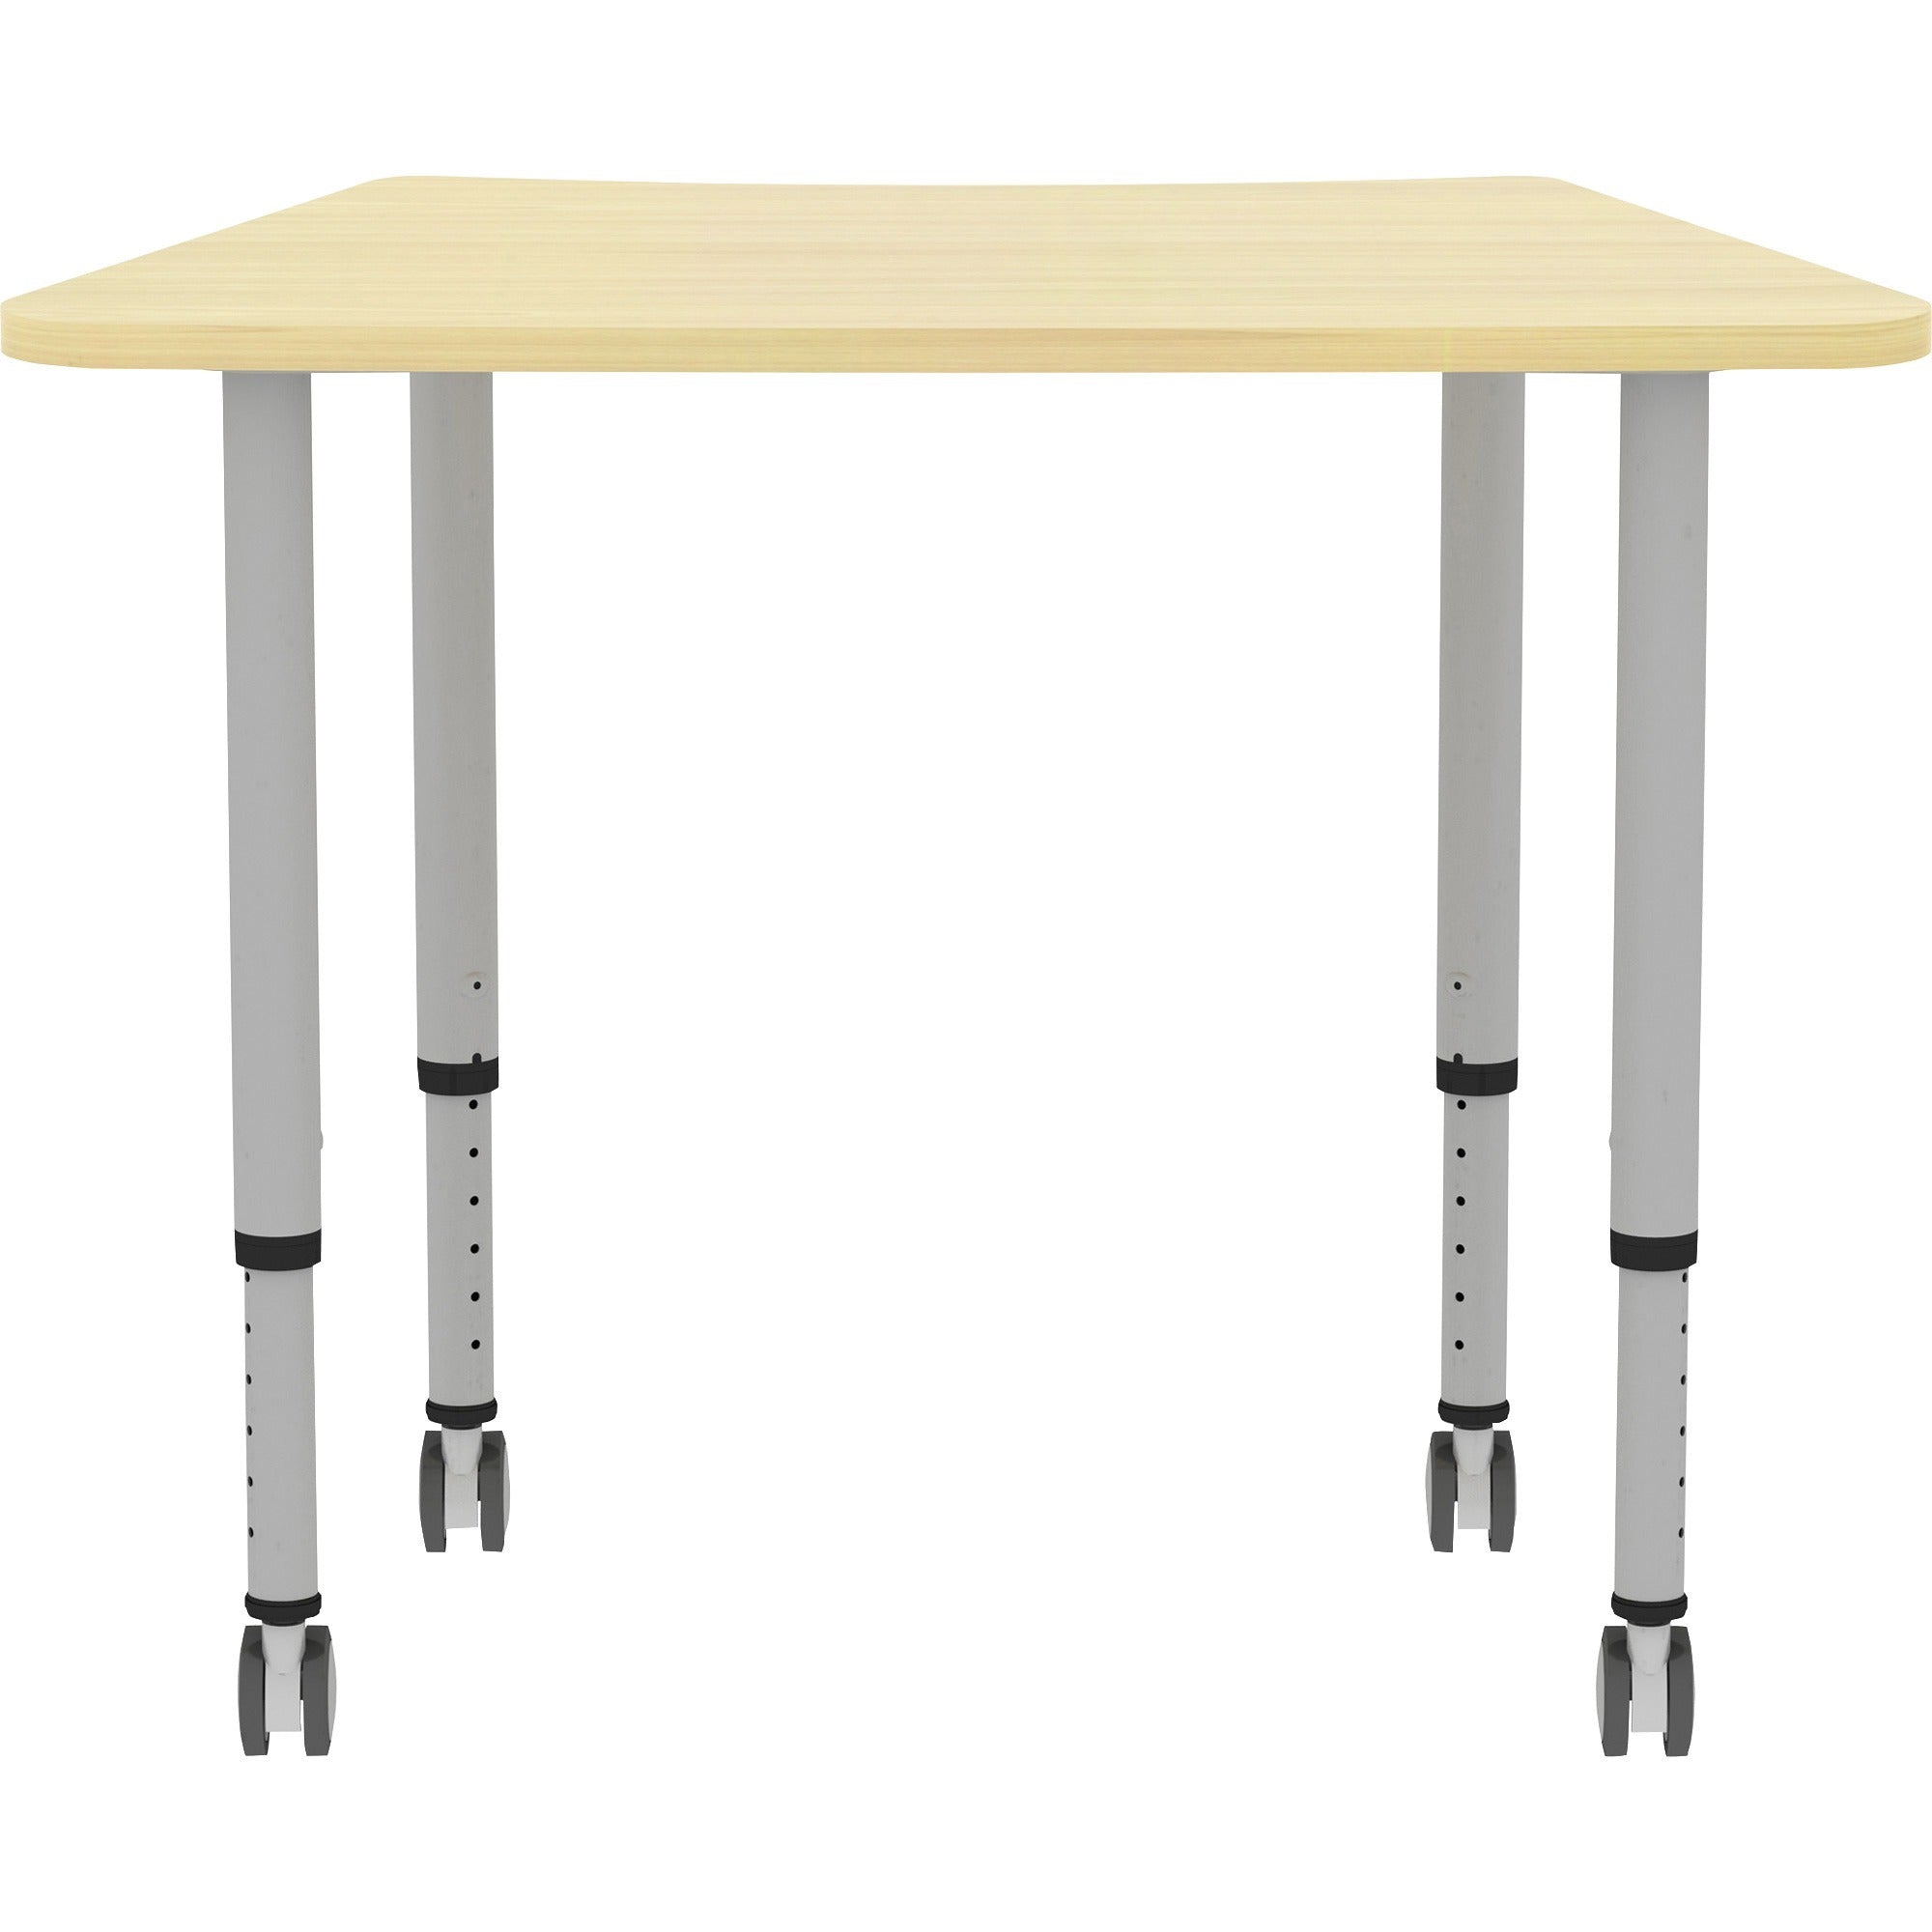 lorell-attune-height-adjustable-multipurpose-curved-table-for-table-toptrapezoid-top-adjustable-height-2662-to-3362-adjustment-x-60-table-top-width-x-2362-table-top-depth-3362-height-assembly-required-laminated-maple-laminat_llr69584 - 5